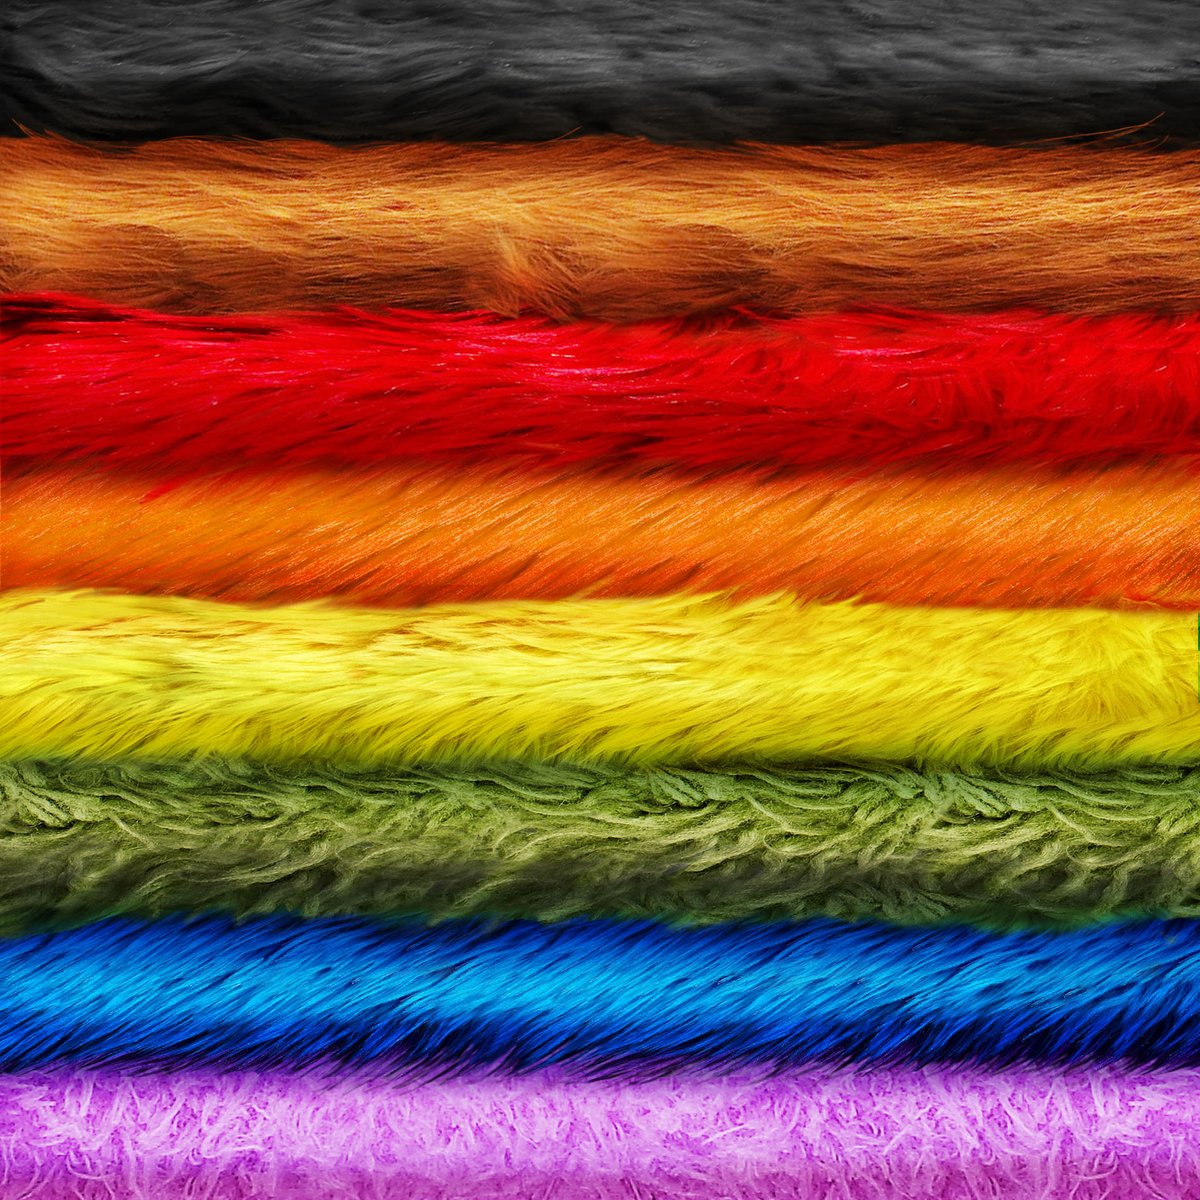 Happy #PrideMonth from Sesame Street! Today and every day, we celebrate and uplift the LGBTQIA+ members of our community. Together, let’s build a world where every person and family feels loved and welcomed for who they are. ❤️🧡💛💚💙💜💗🤎🖤